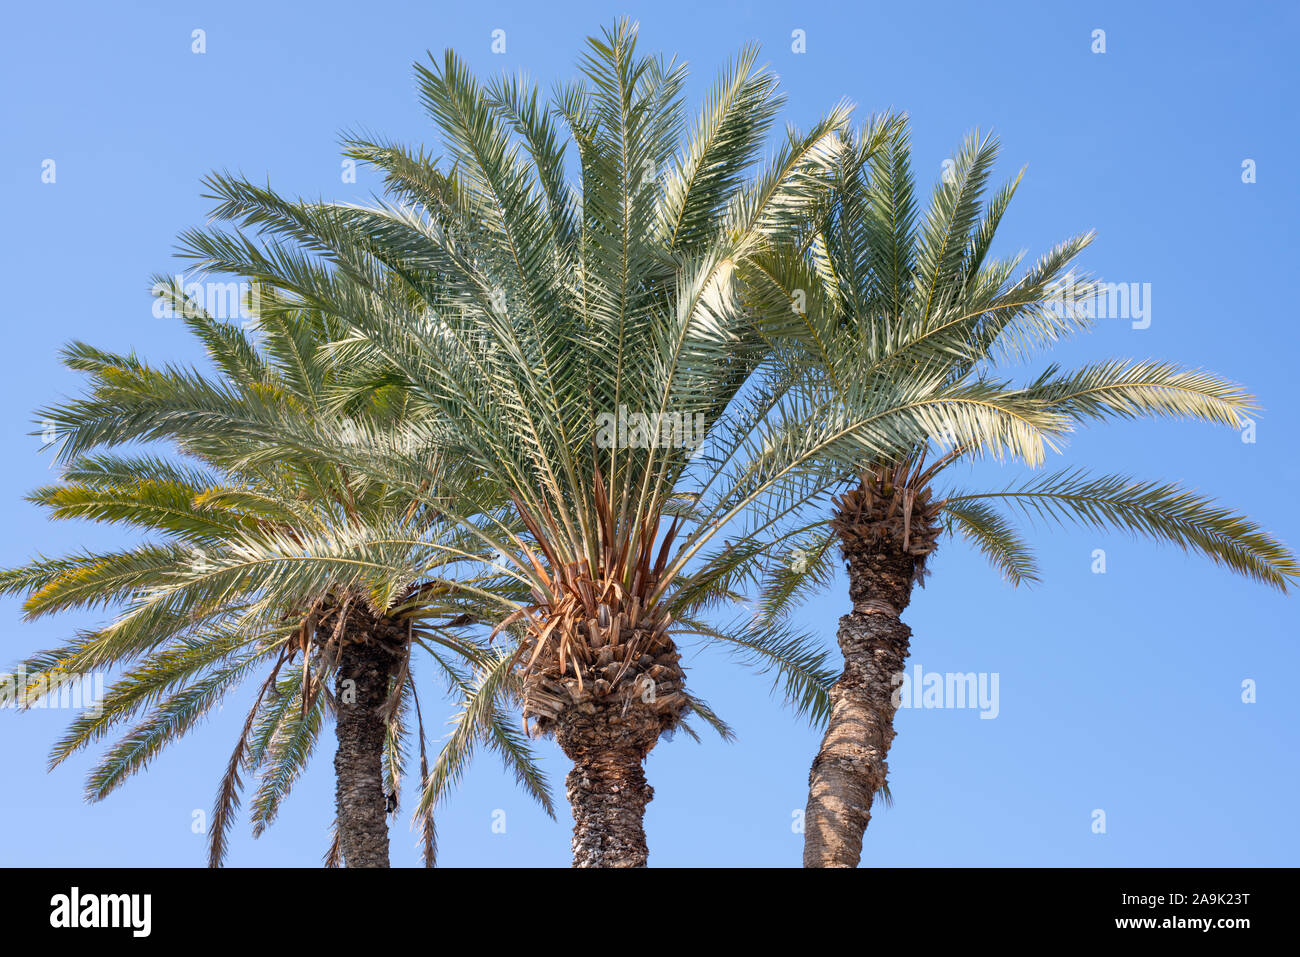 Palms against a blue sky number 3938 Stock Photo